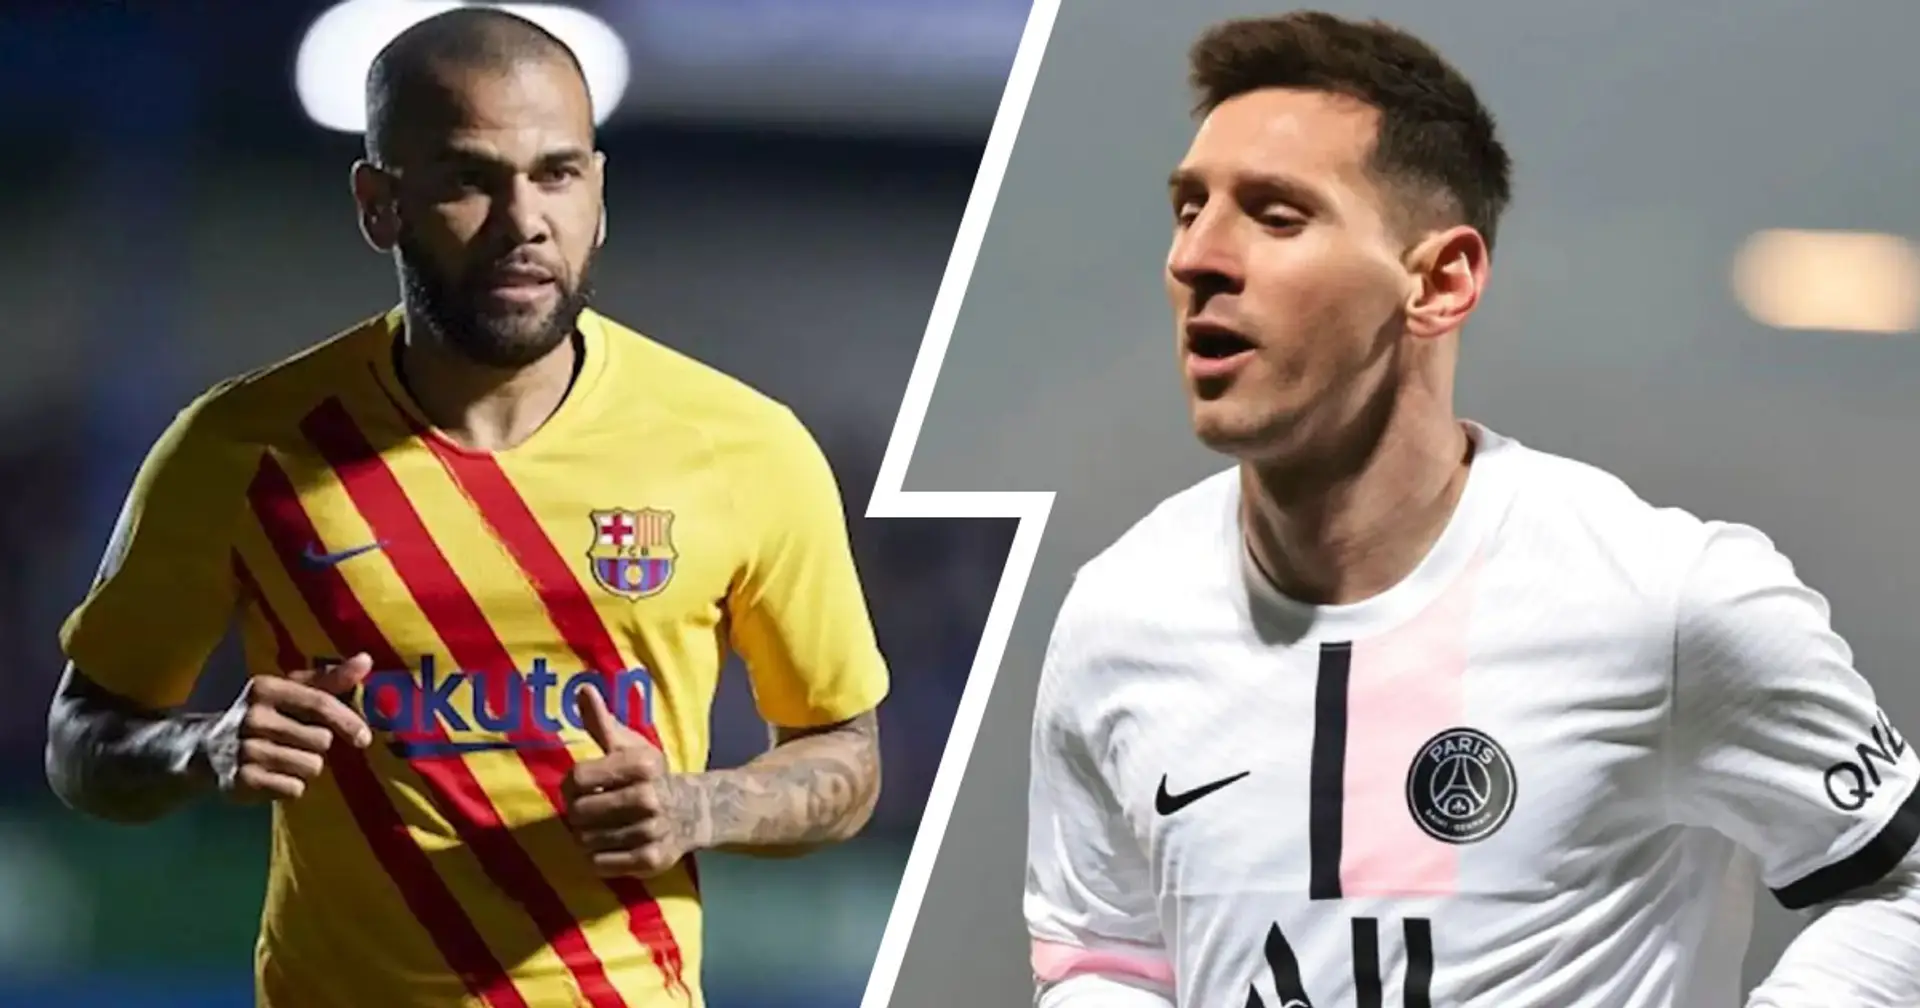 'It's strange not seeing him here': Dani Alves explains how he feels playing without Messi at Barcelona